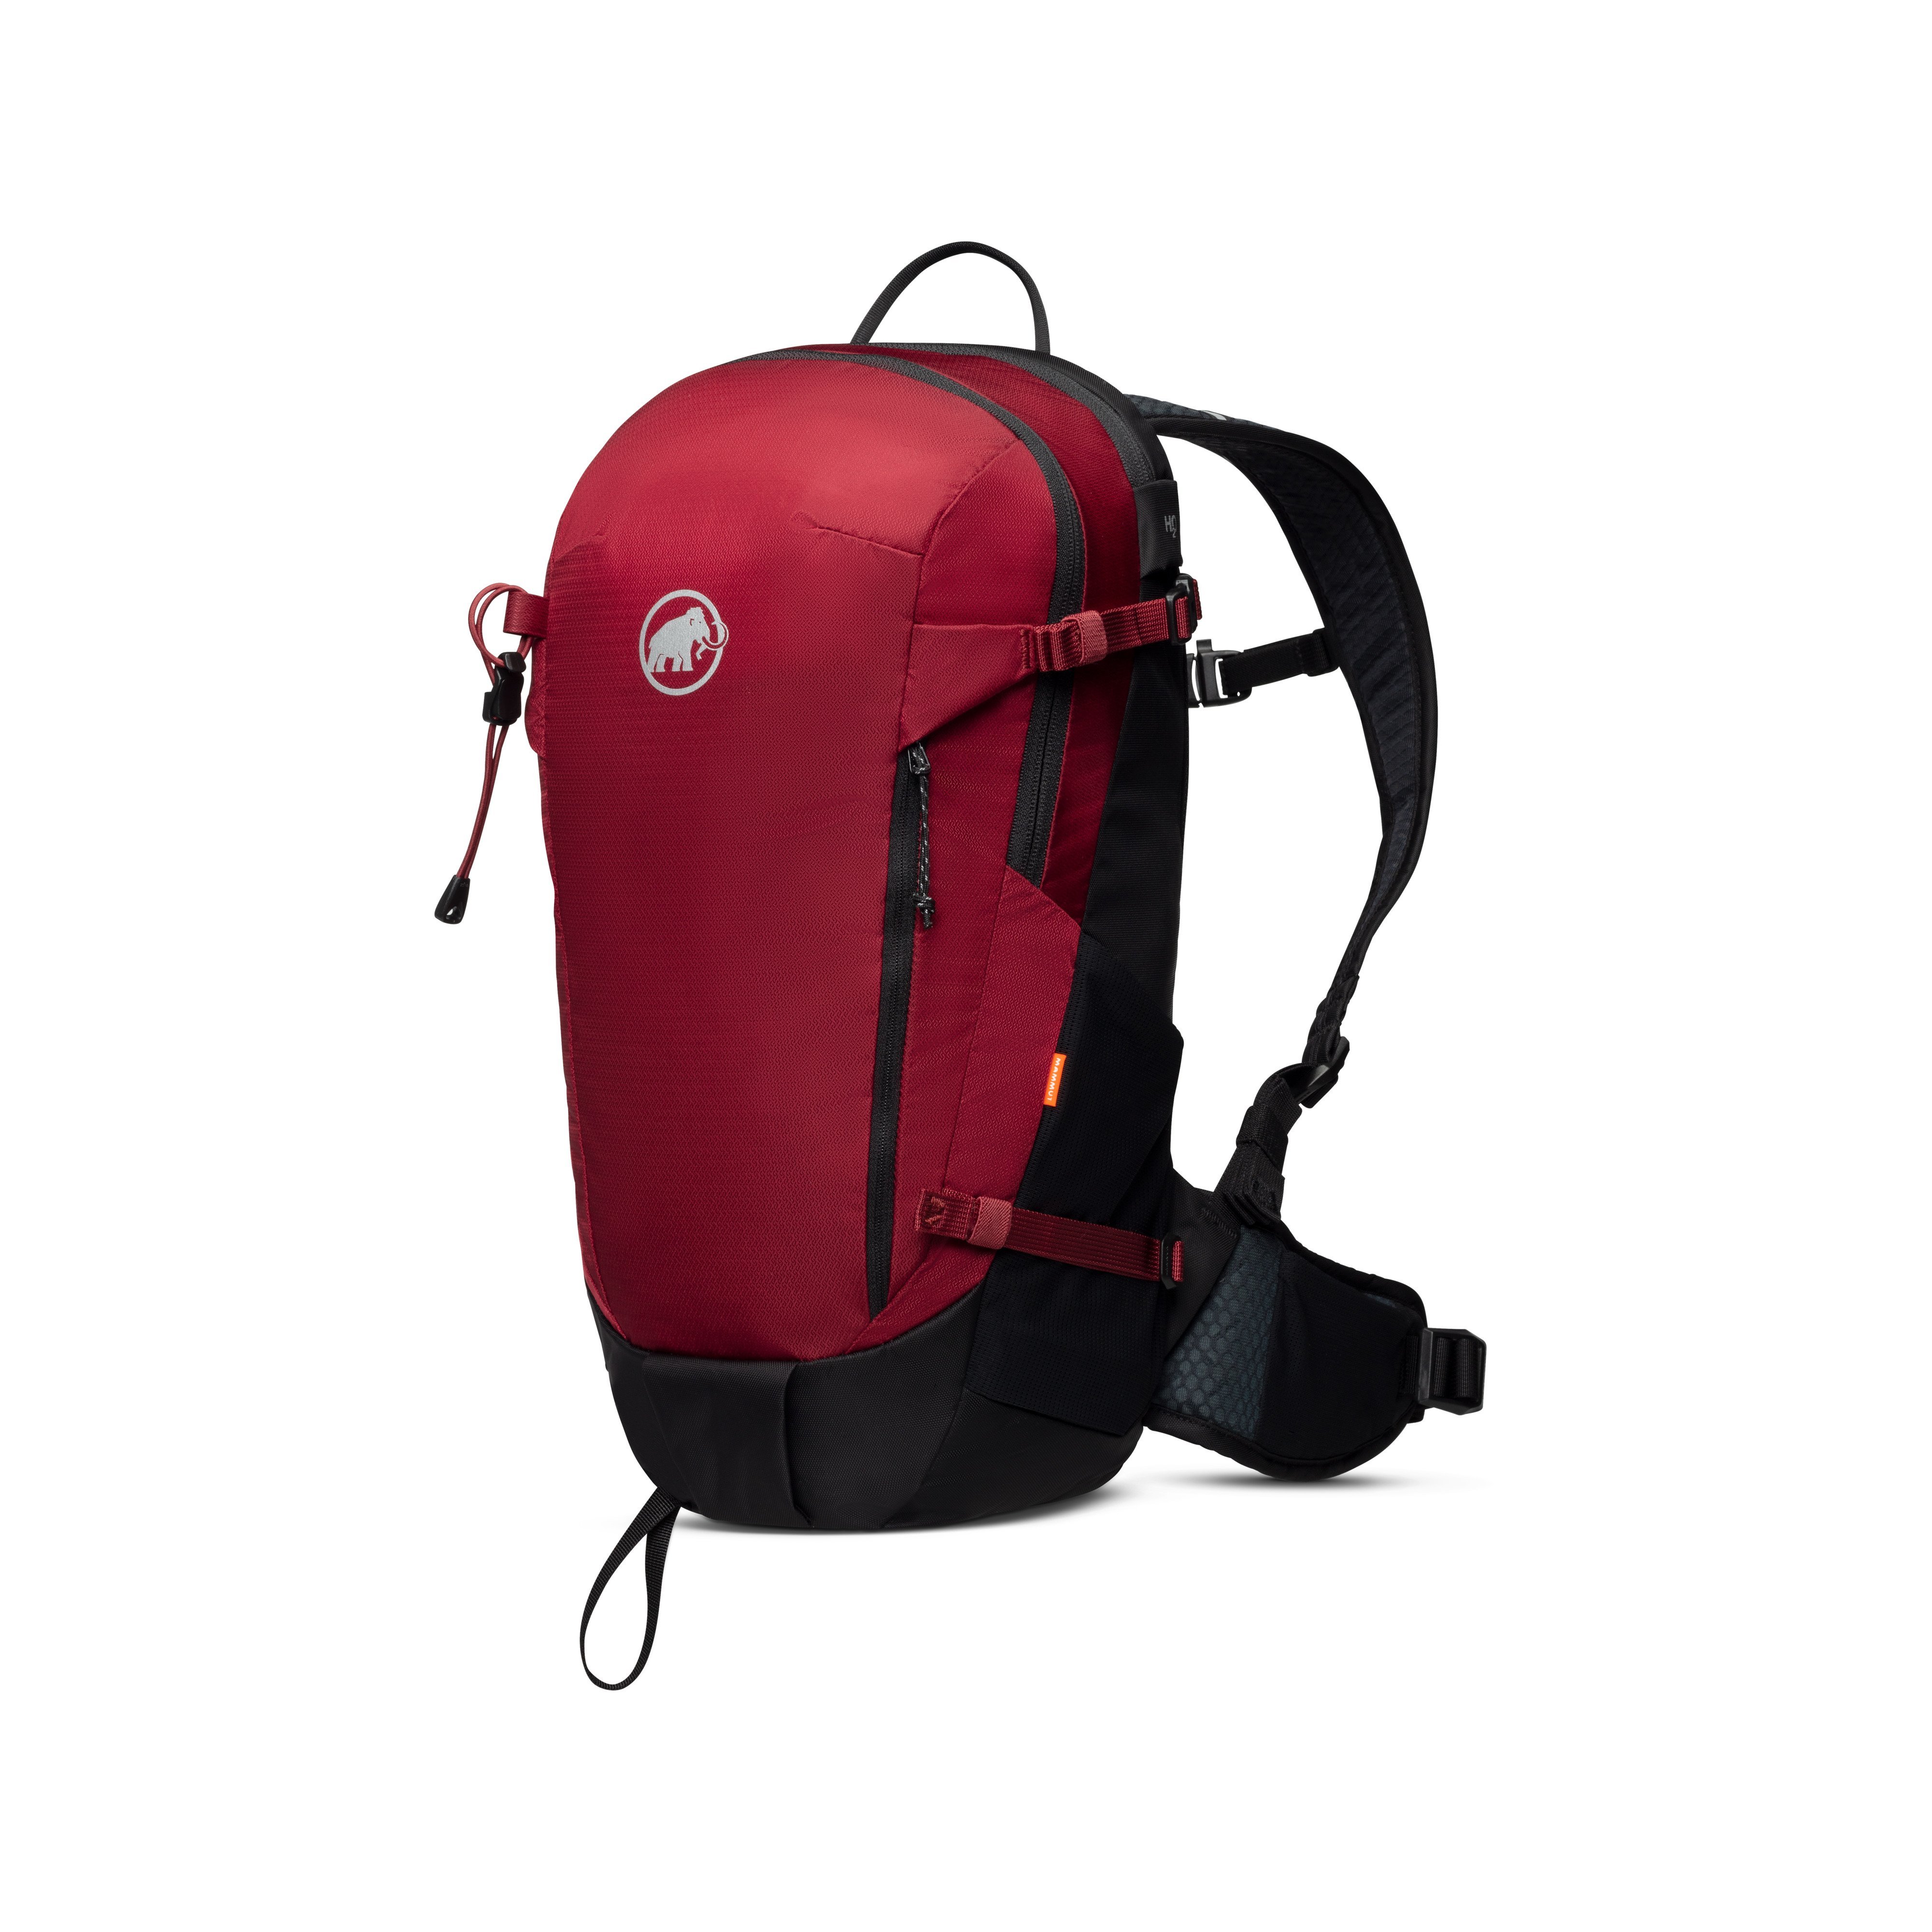 Lithium 15 Women - blood red-black, 15 L product image